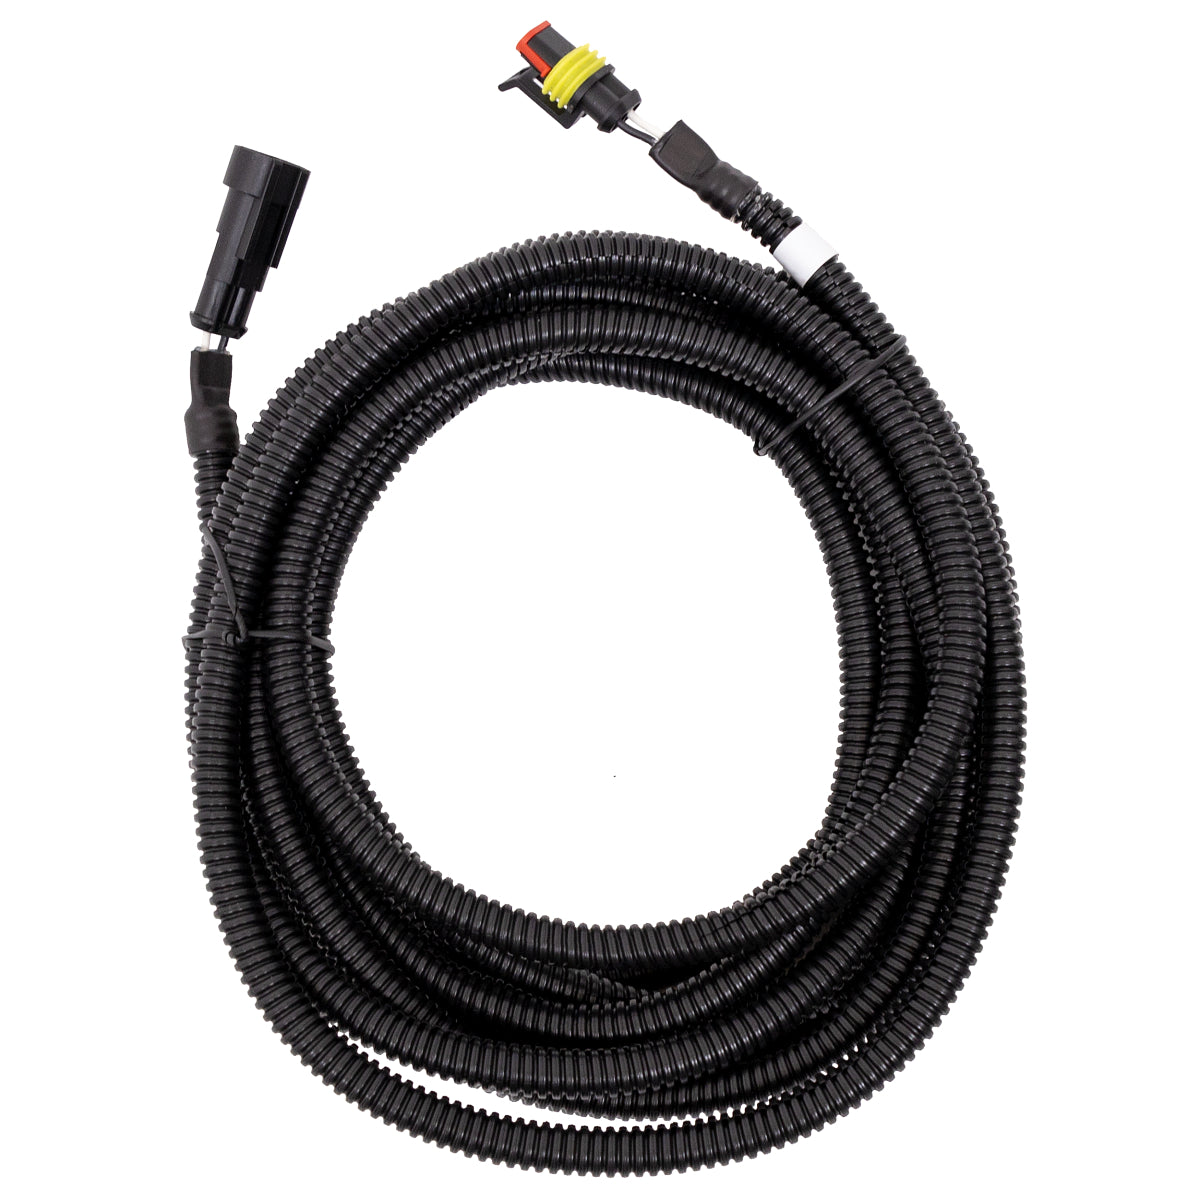 PS8404 Weatherguard 15' Wire Extension - Extension Cord